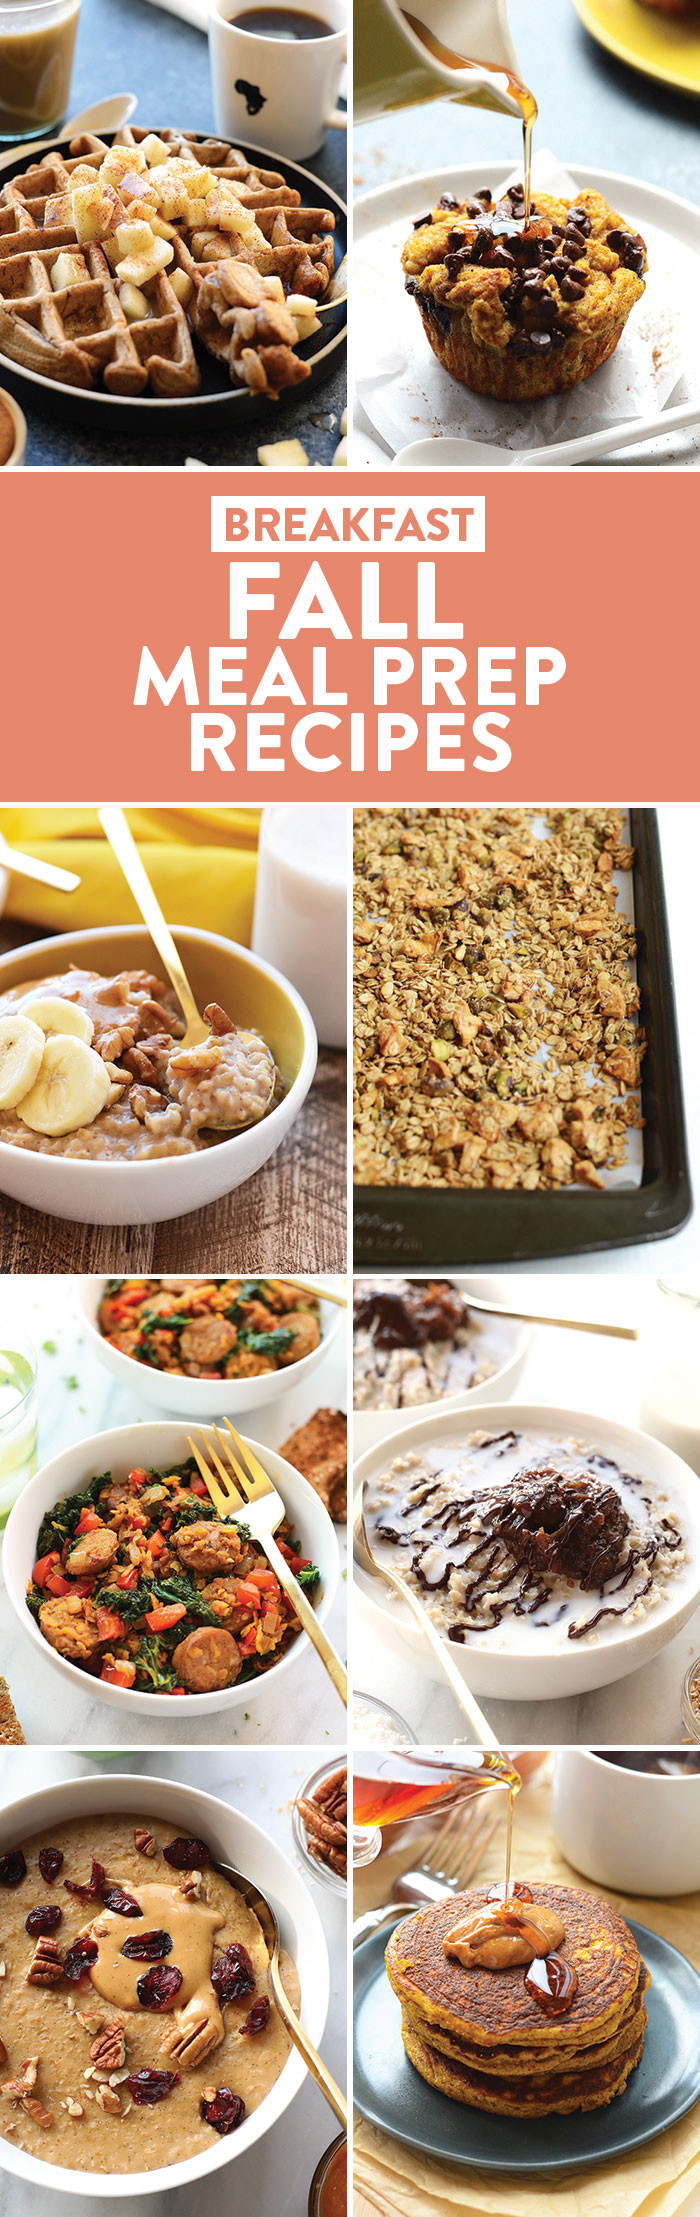 Healthy Fall Breakfast Recipes
 50 Healthy Meal Prep Recipes for Fall